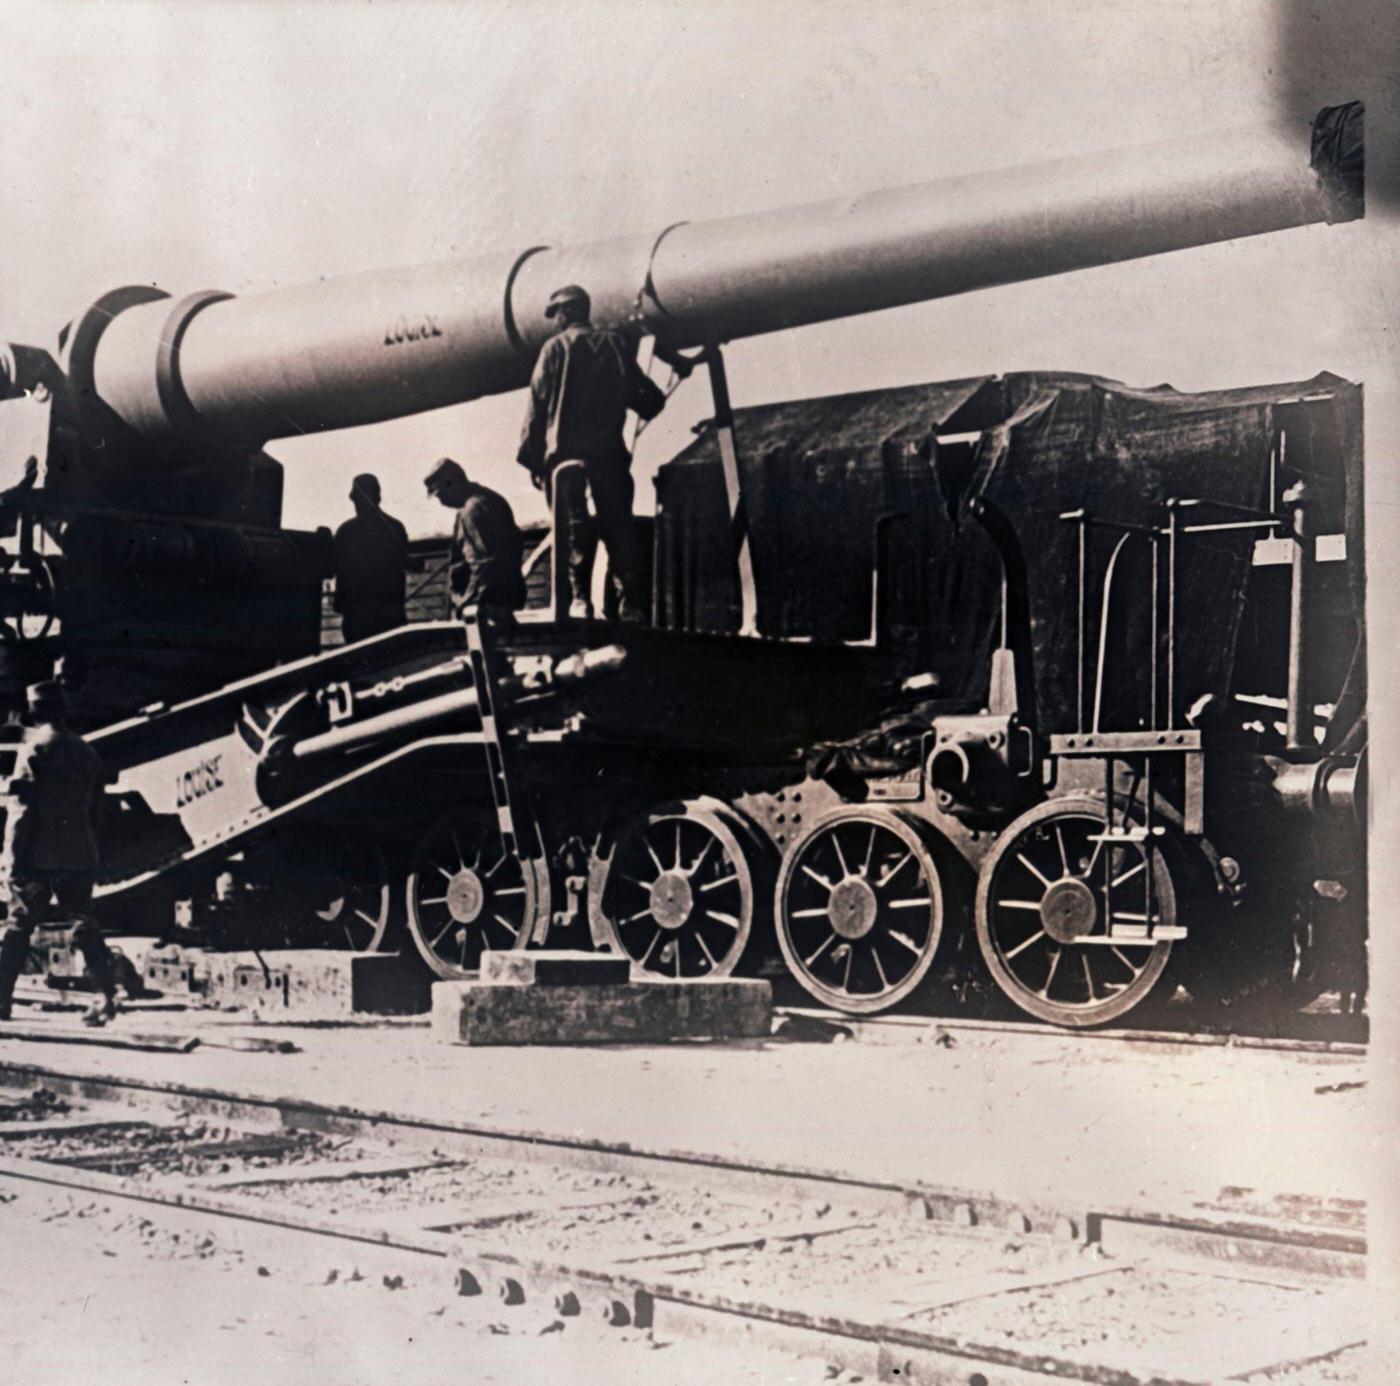 Heavy artillery on a train, circa 1914-1918, with a large gun named "Louise."